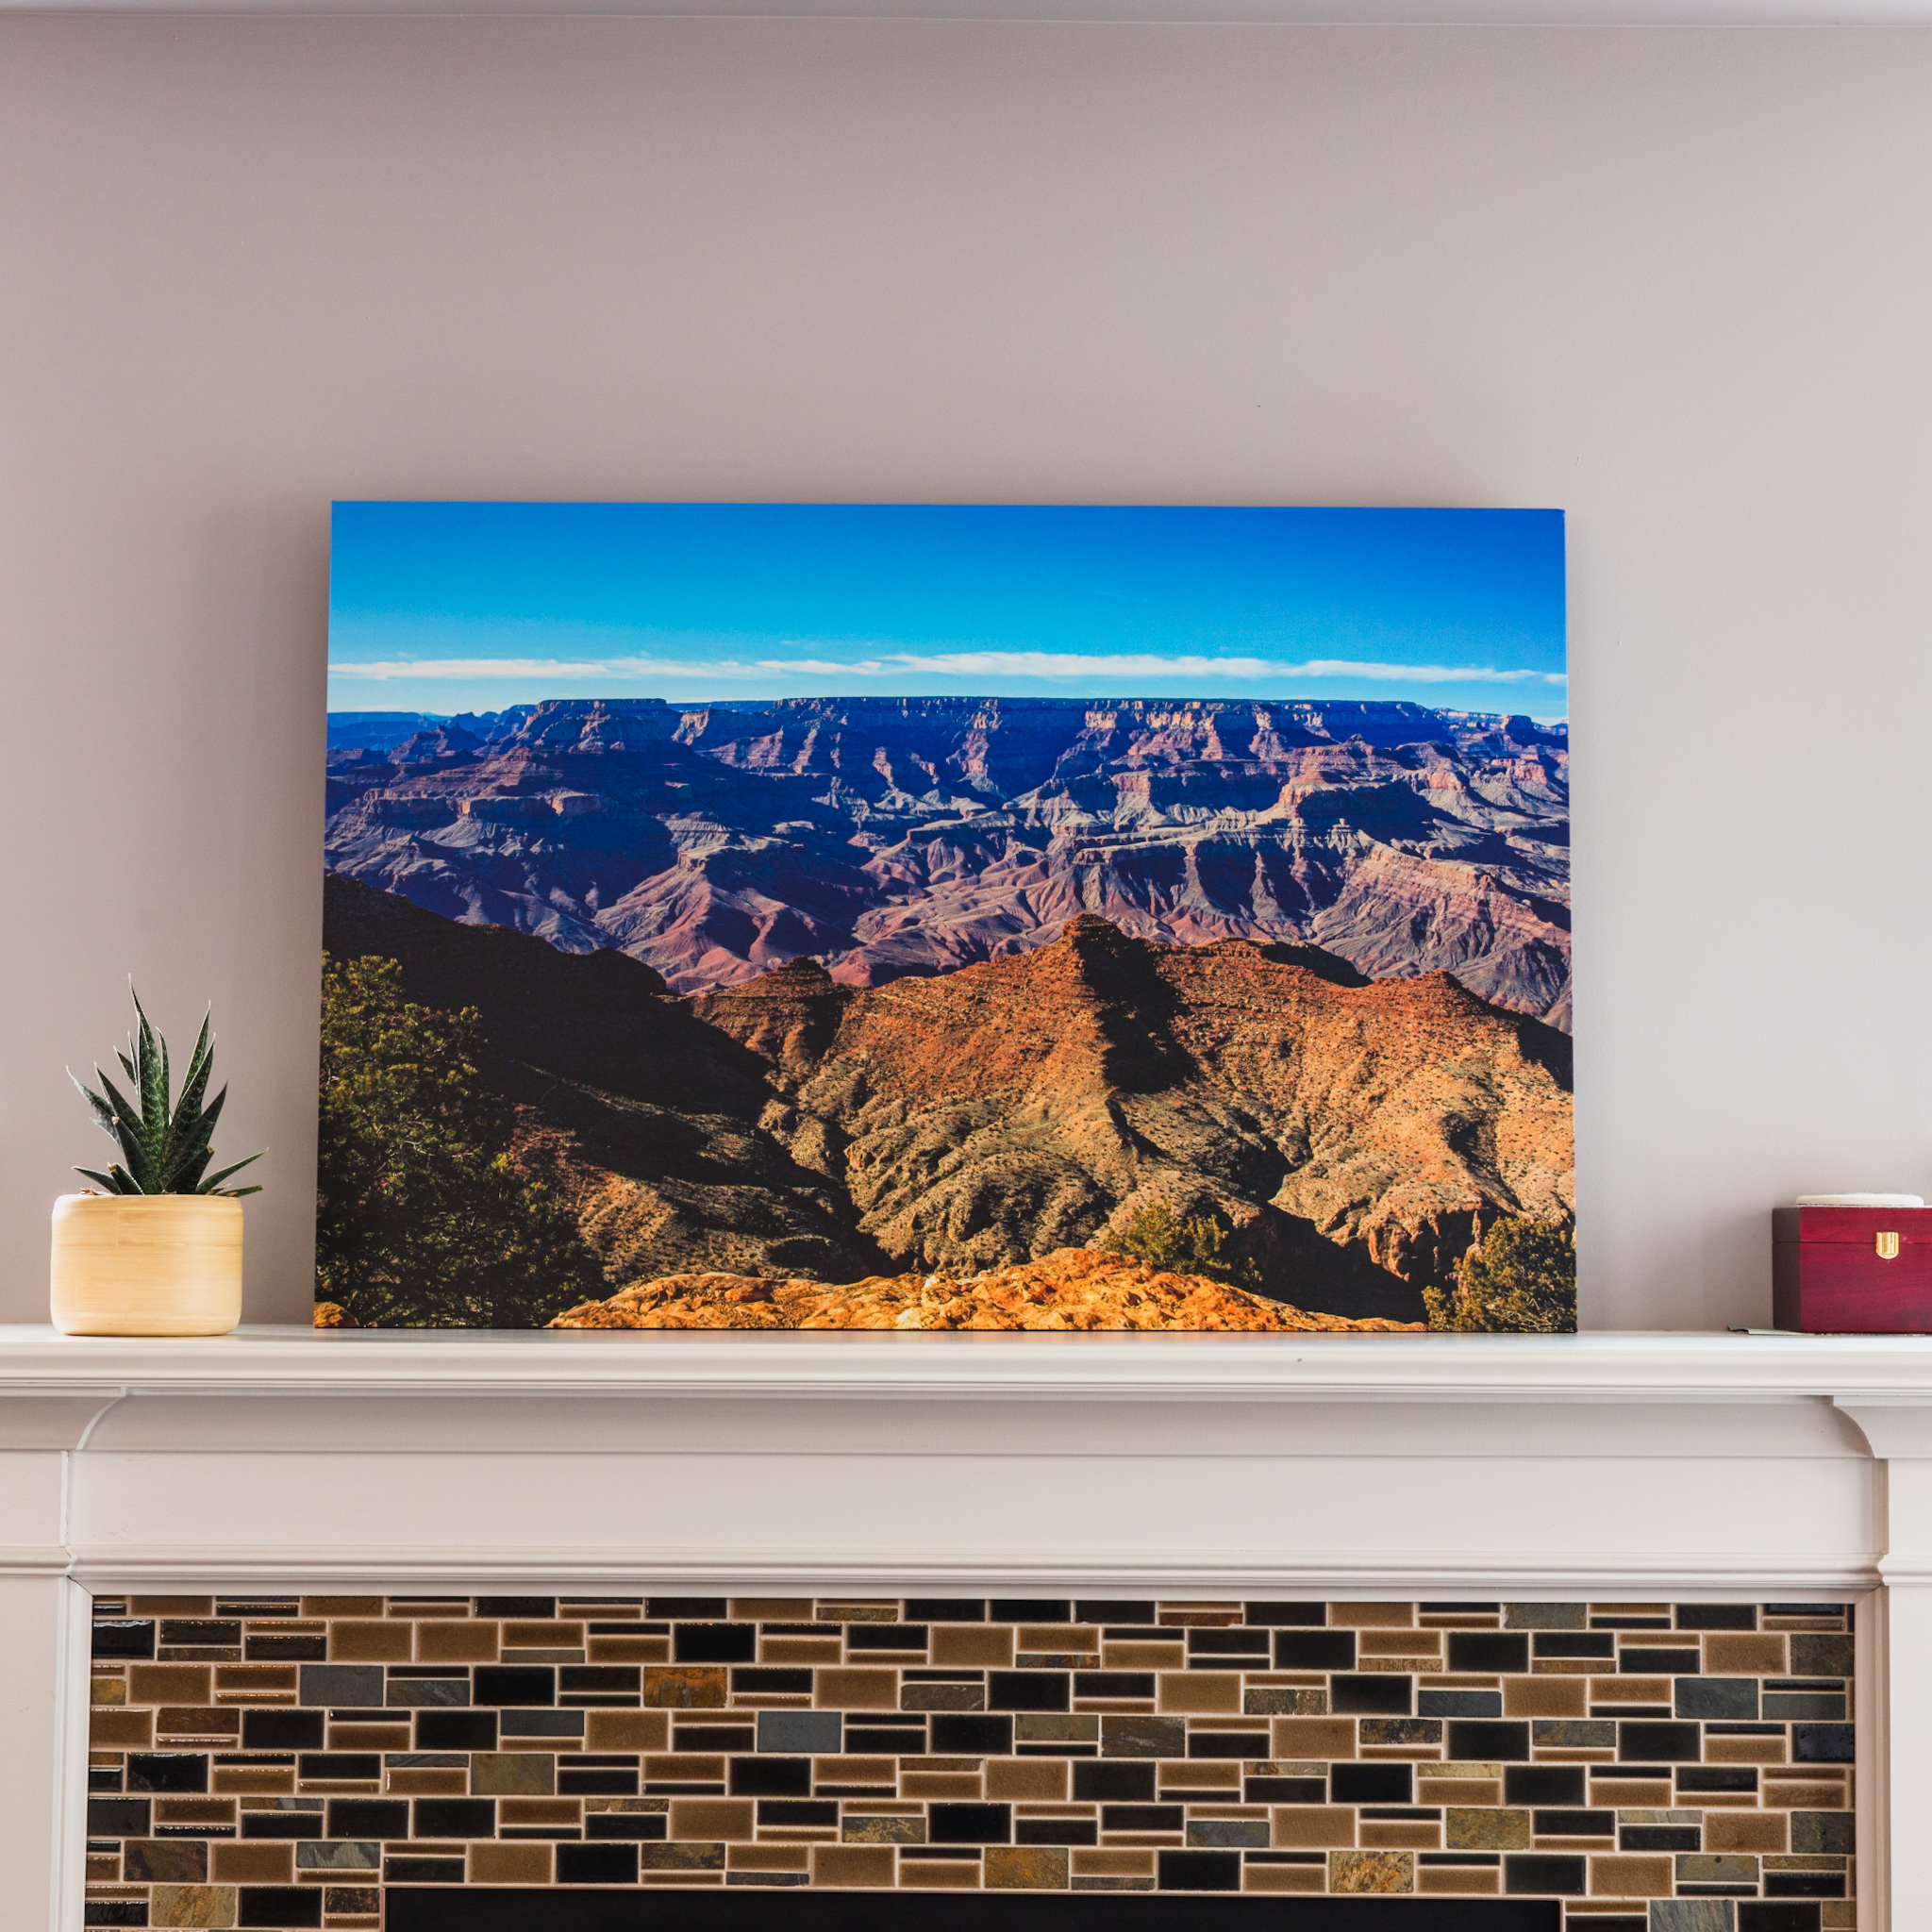 32”x48” Stretched Canvas - Grand Canyon